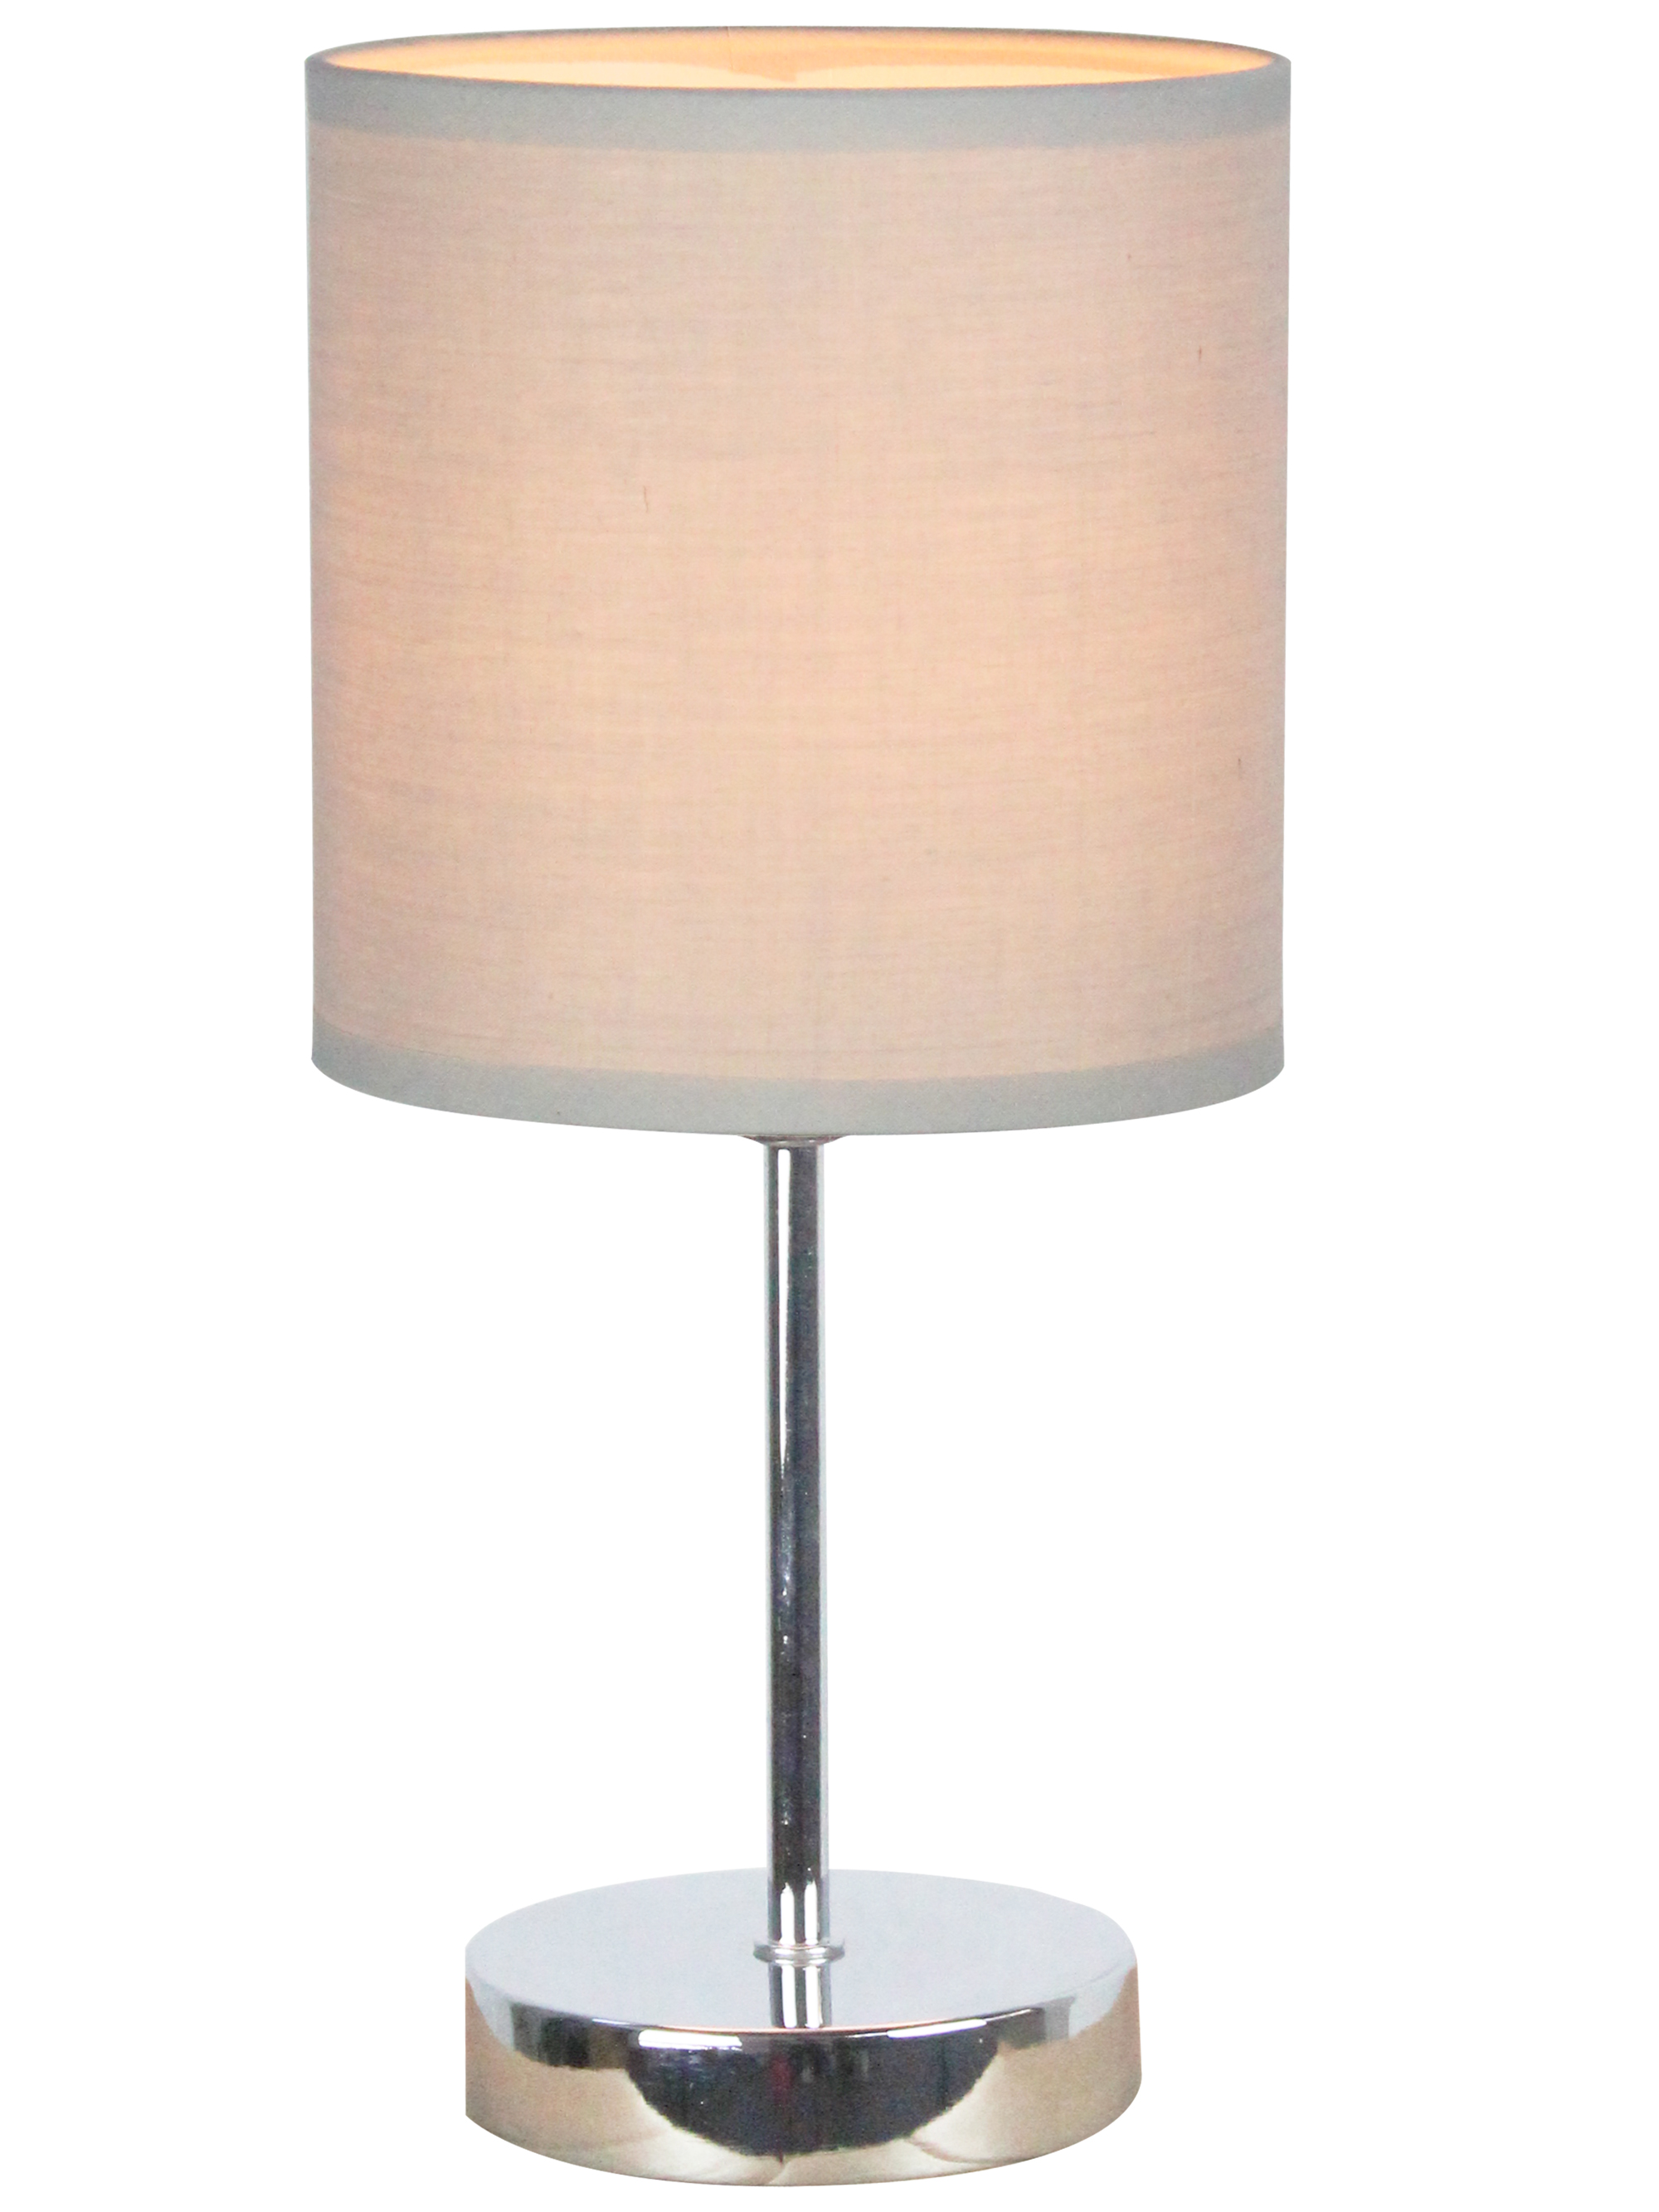 Simple Designs Chrome Mini Basic Table Lamp with Fabric Shade